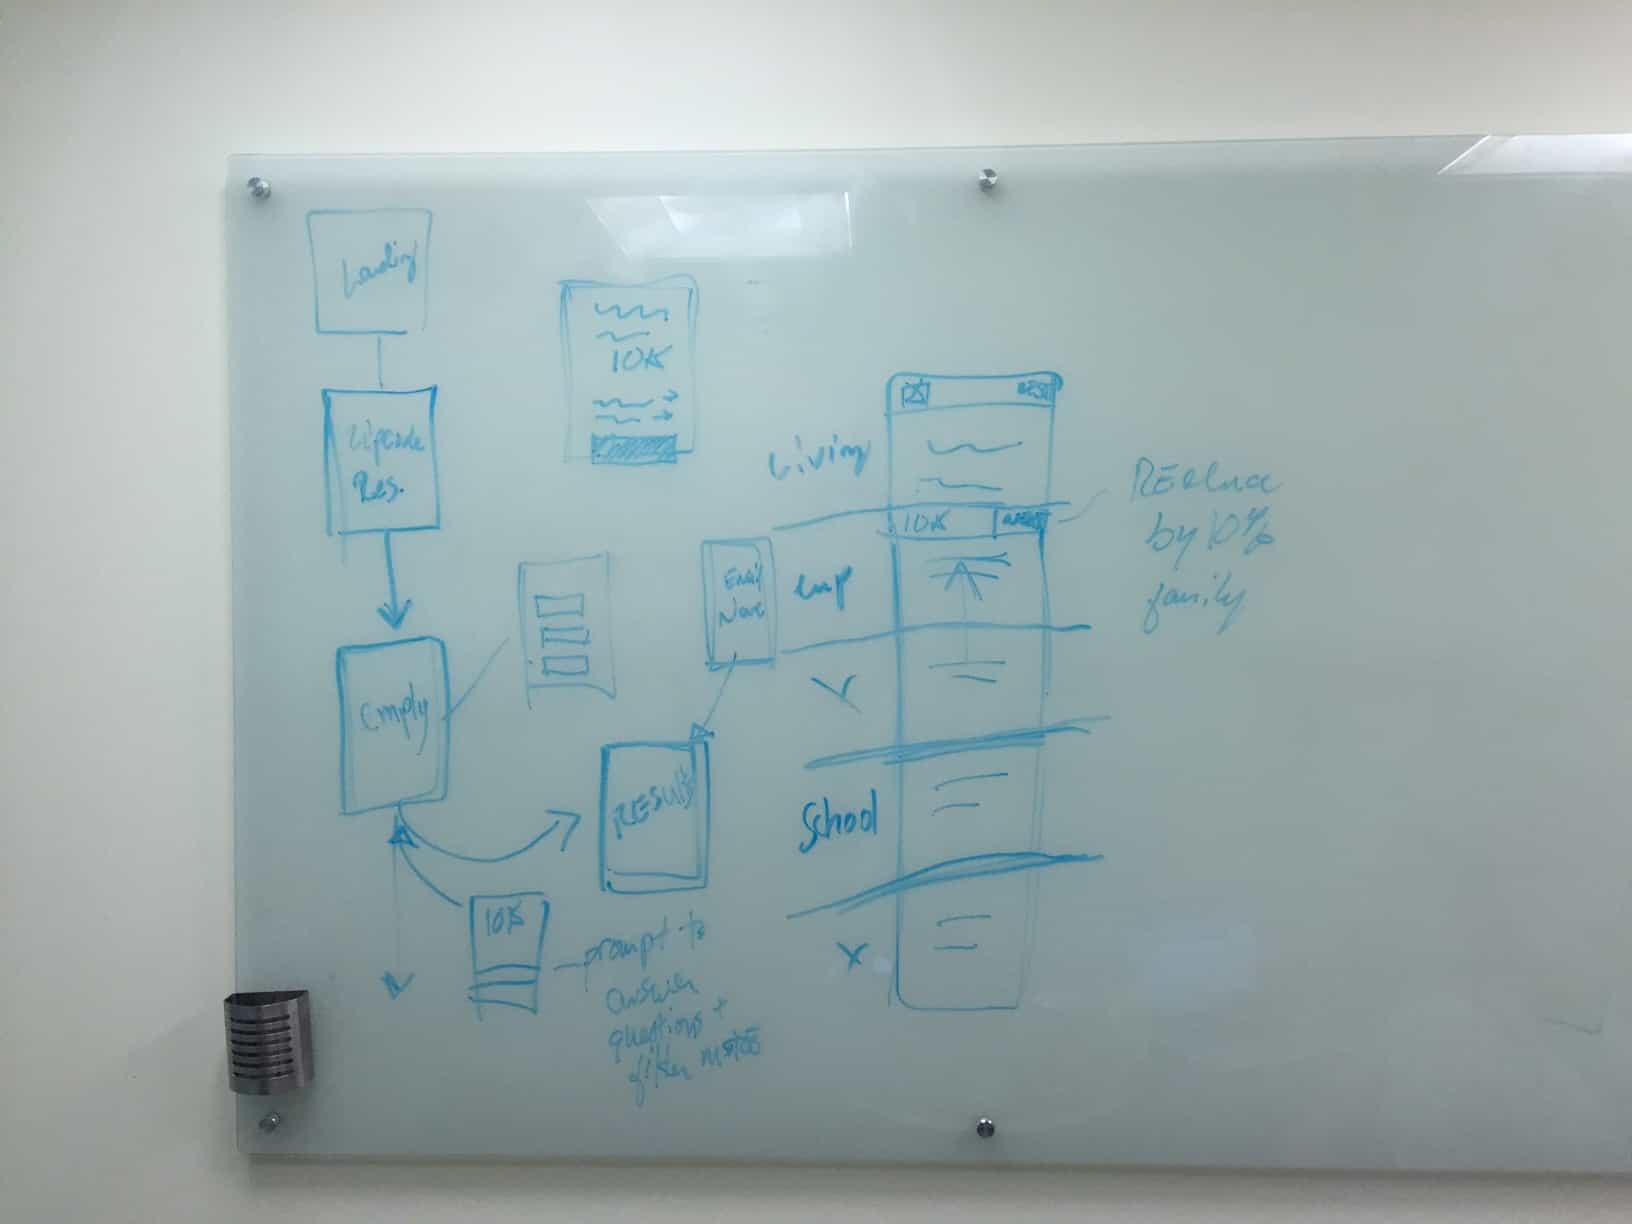 // Whiteboarding session of user flow (2 of 2)